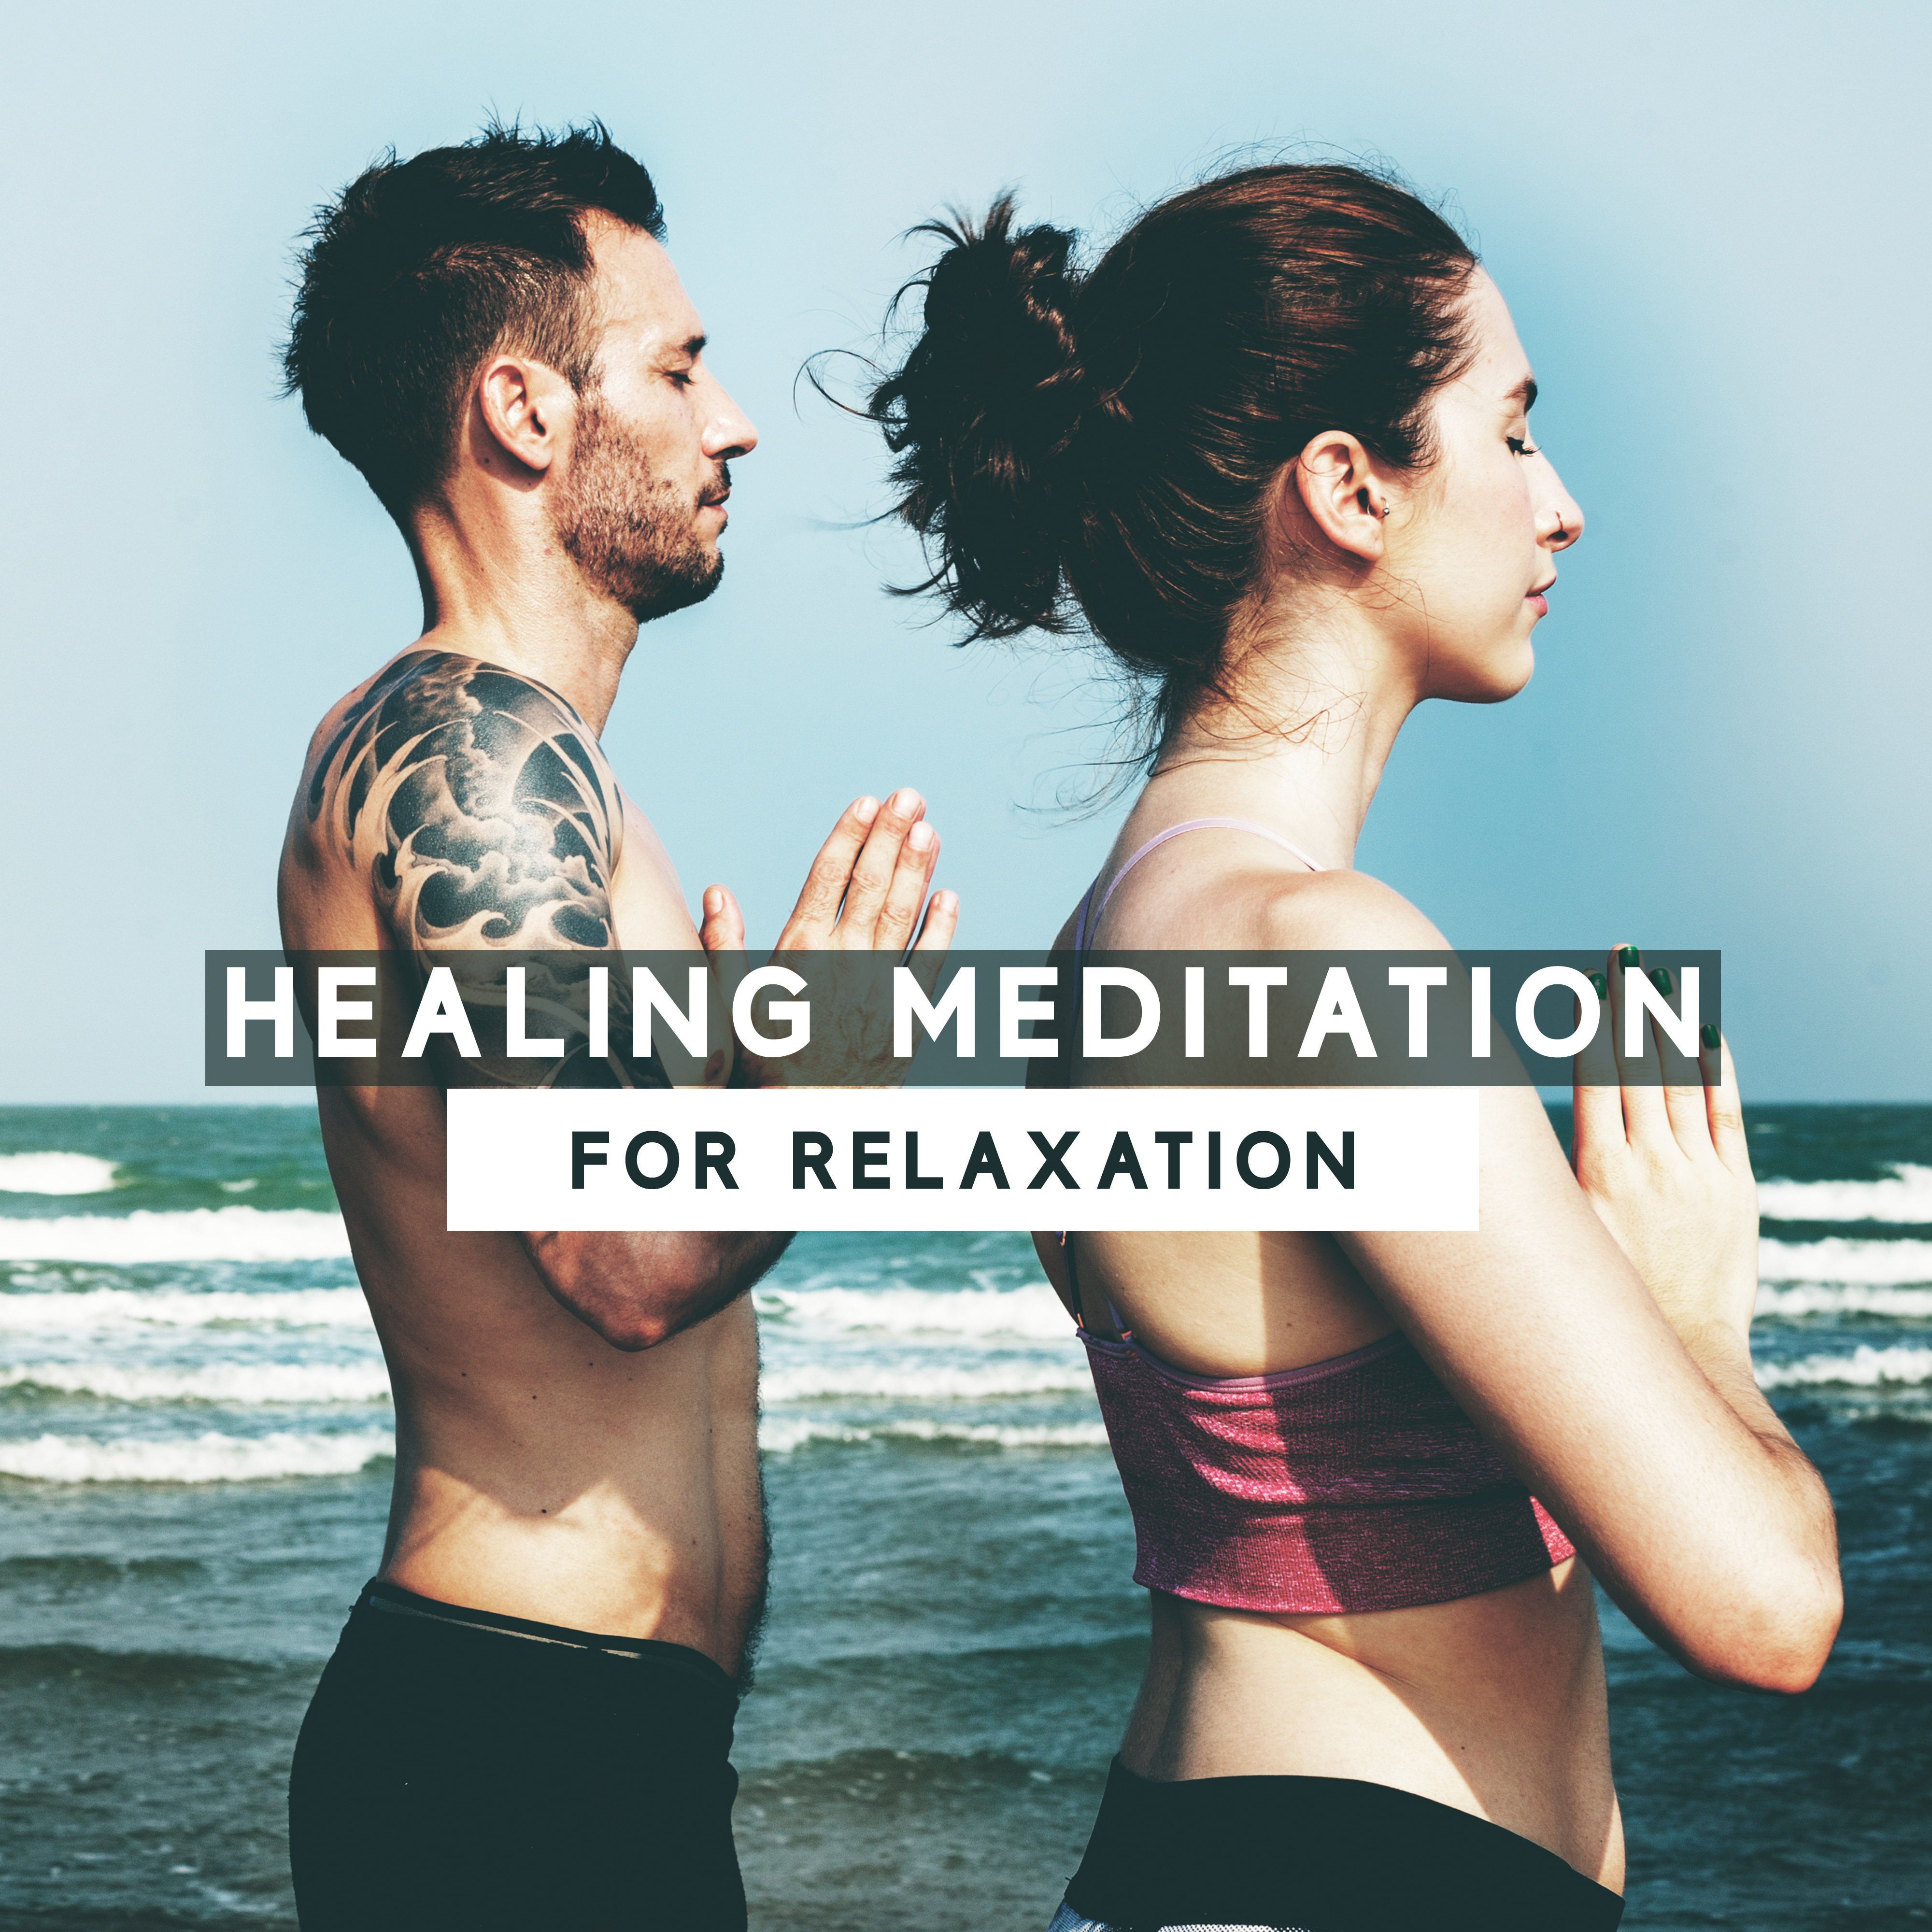 Healing Meditation for Relaxation